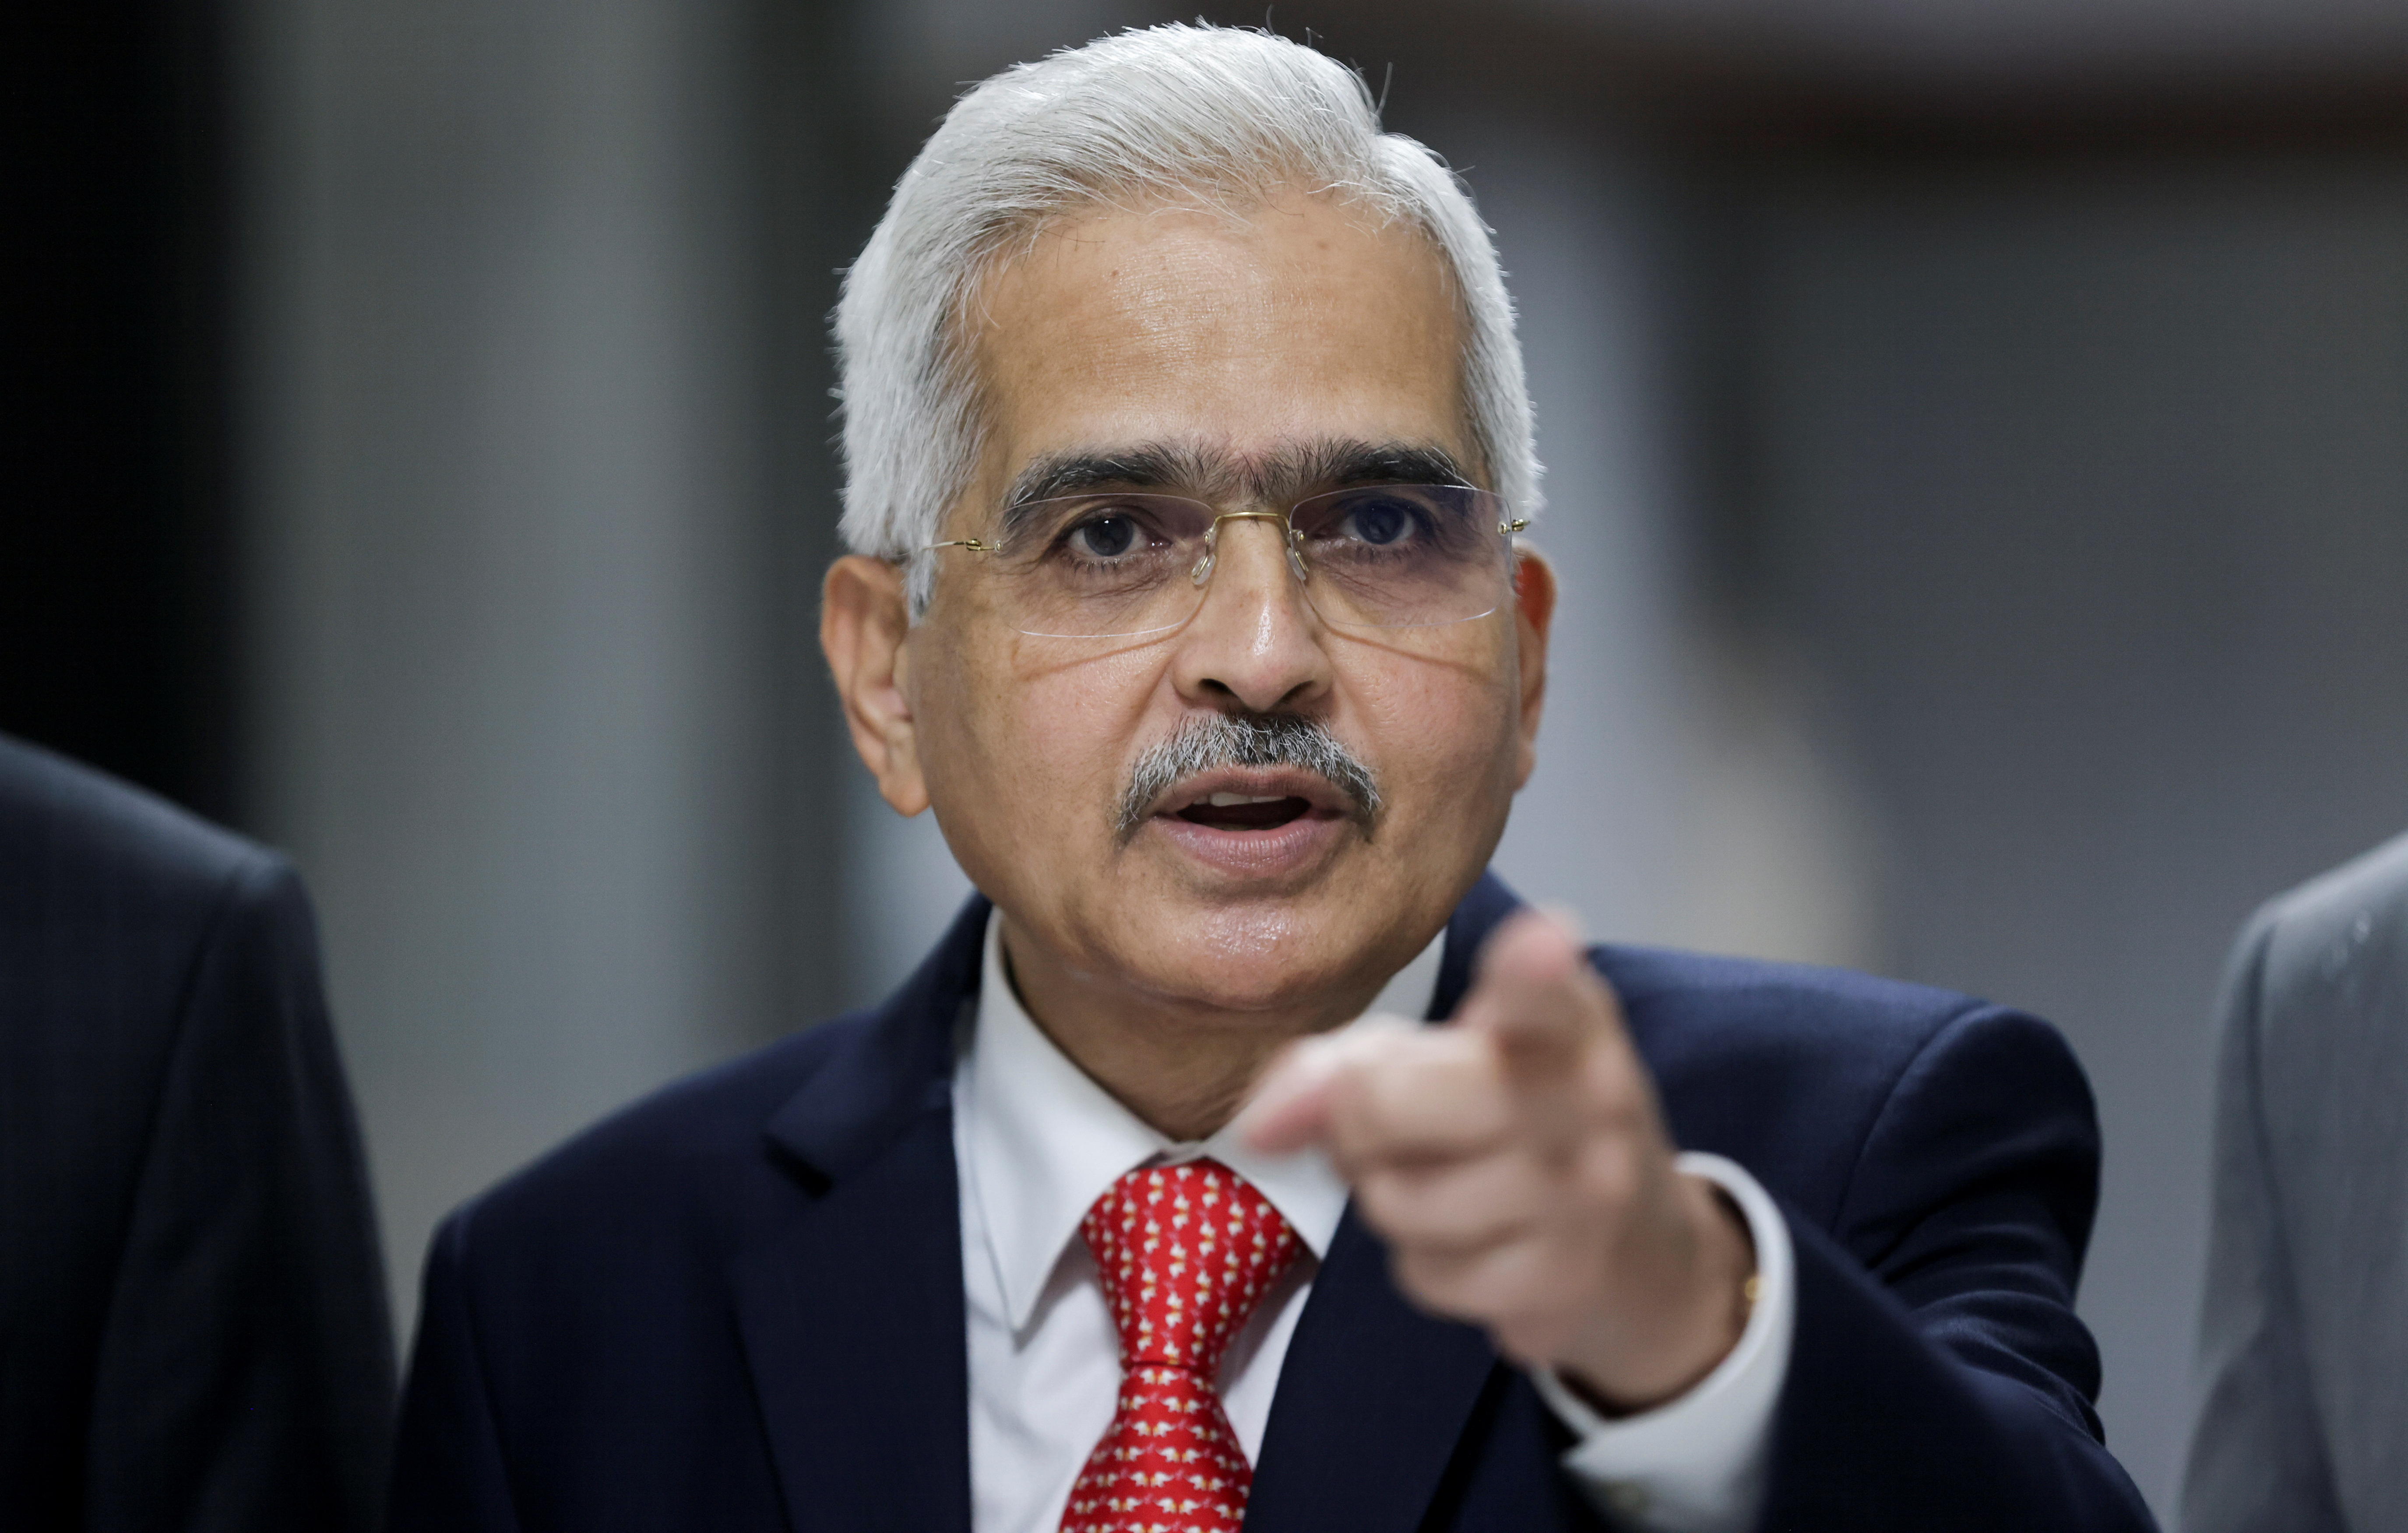 India cenbank chief: Inflation has peaked, will moderate -ET Now | Reuters